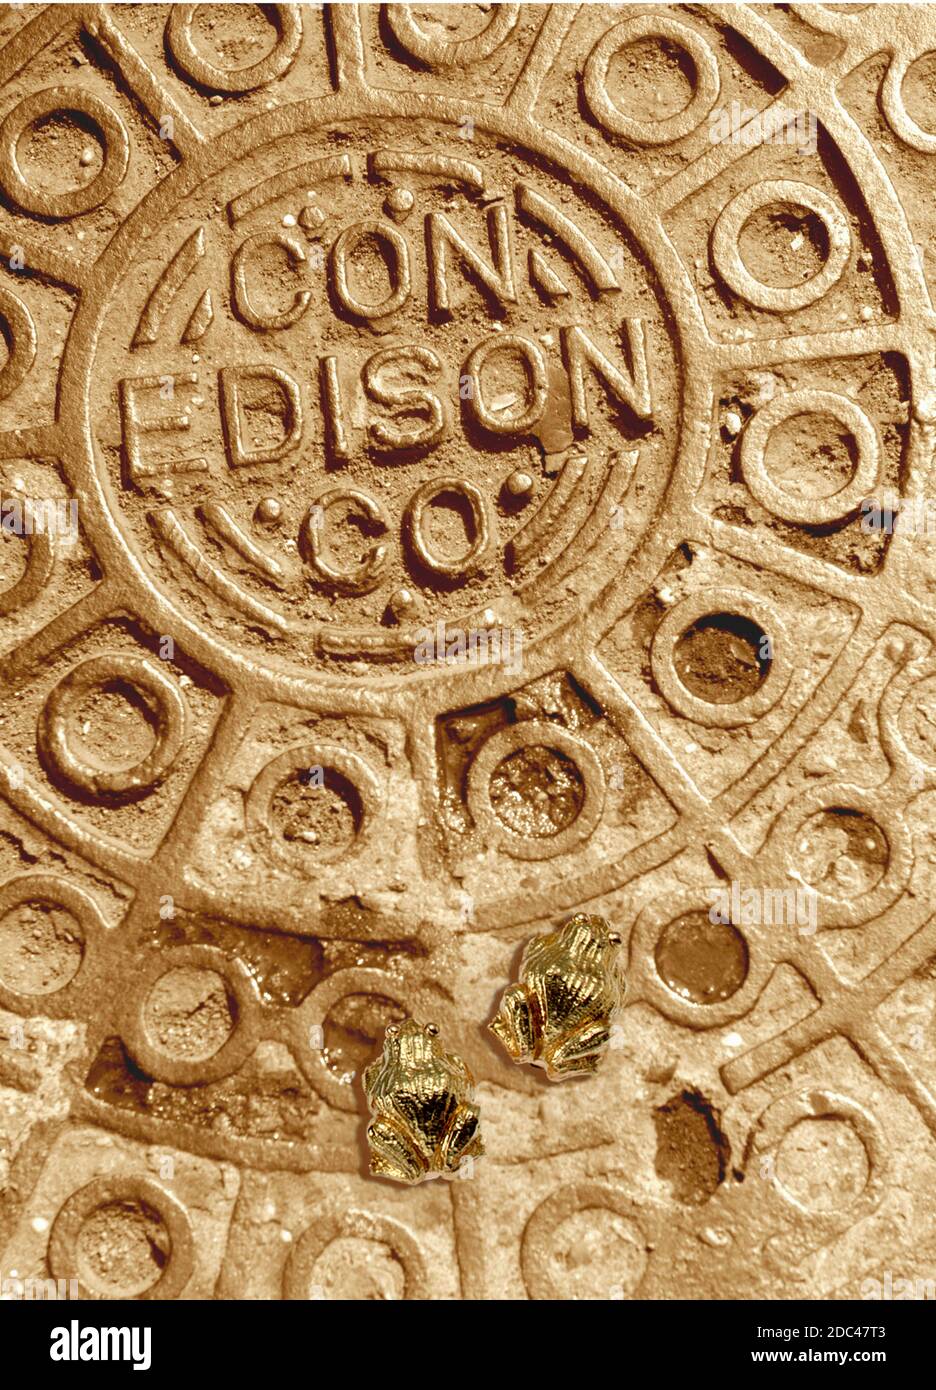 Con Edison man hole cover colored gold with two small golden frogs in this vertical color conceptual photograph. Stock Photo